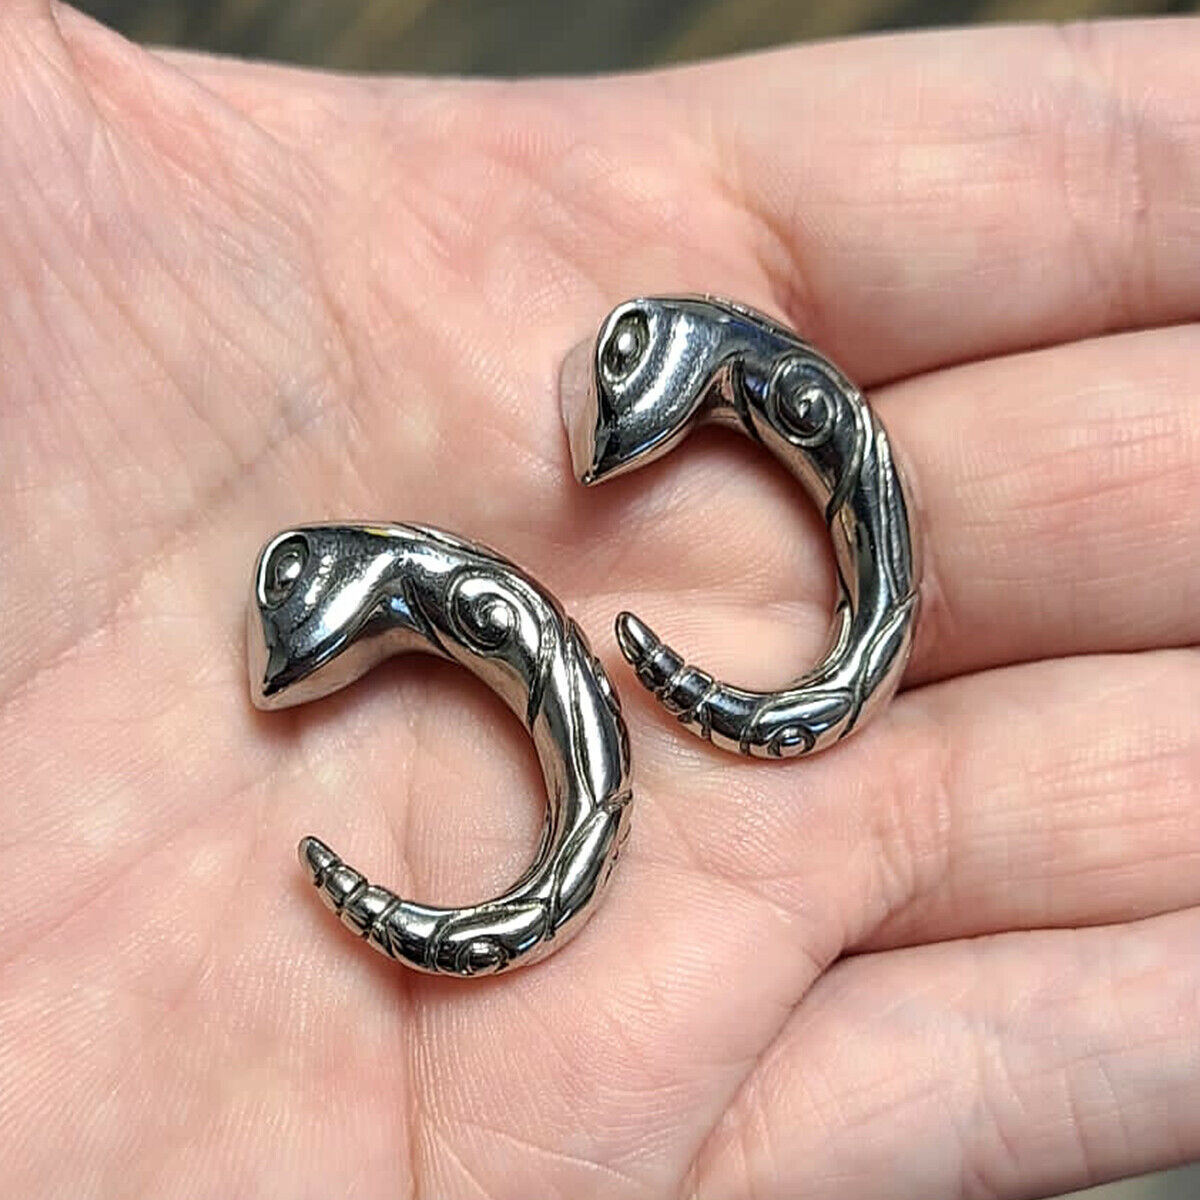 Pair of Ear Tapers with Snake Design Surgical Steel 8g - Sold as a pair